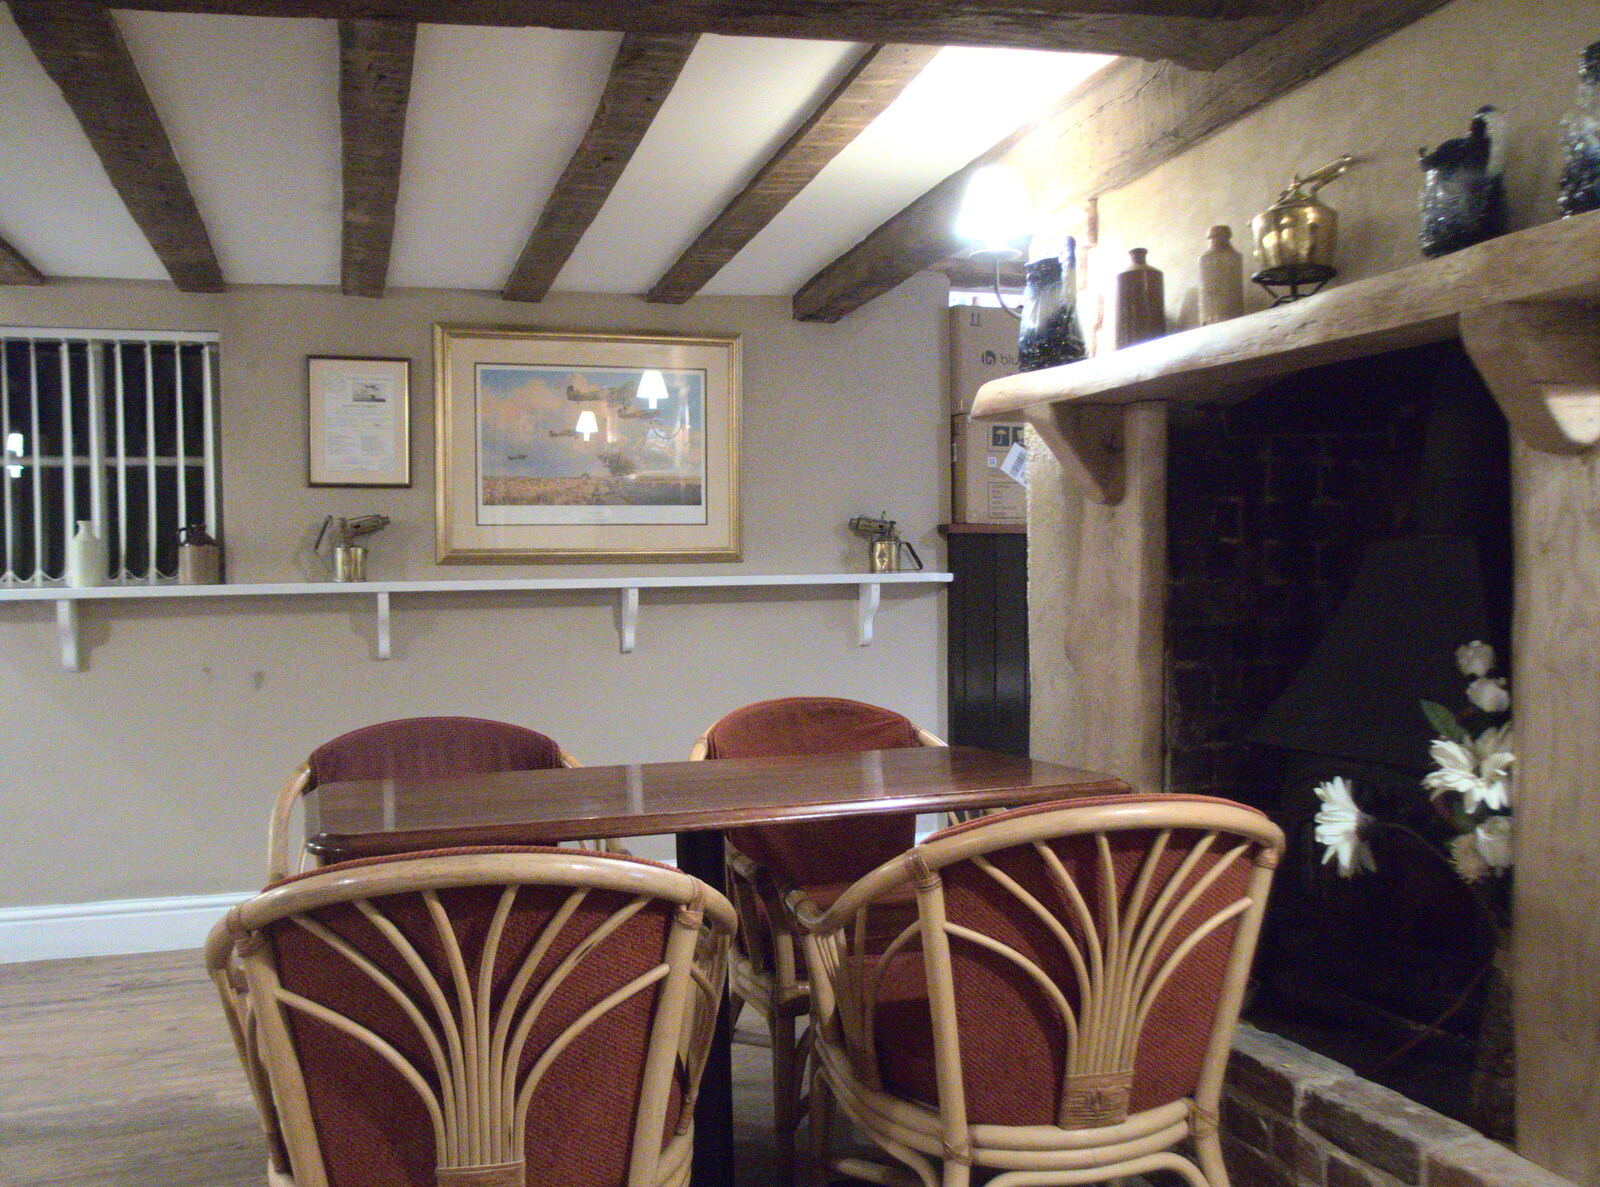 Tables in the Beaconsfield Arms from The GSB Band Hut and a Miscellany - Gislingham and Brome, Suffolk - 19th September 2020